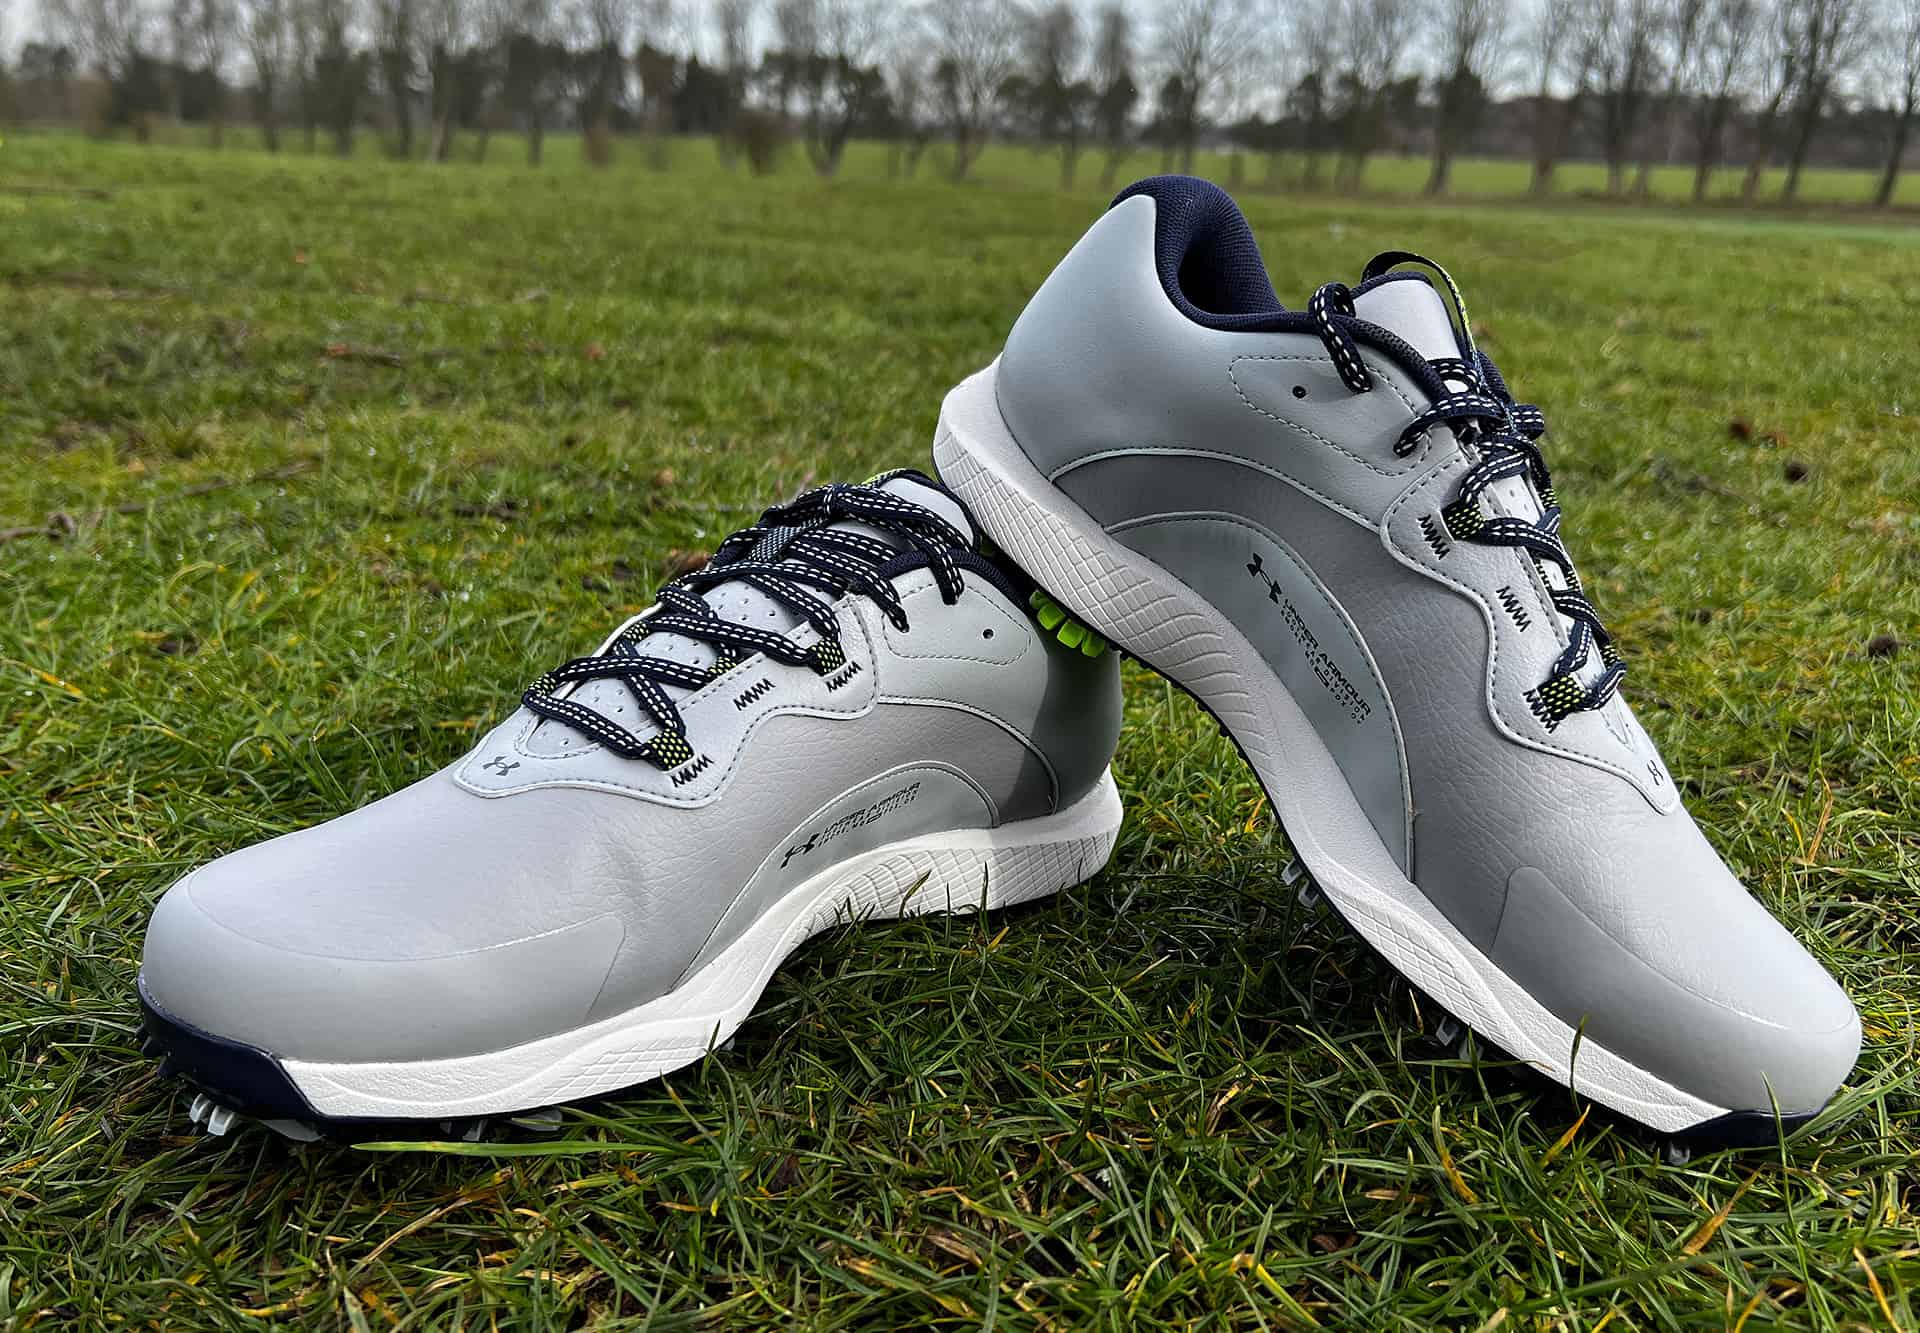 Under Armour Charged Draw 2 Golf Shoe Review